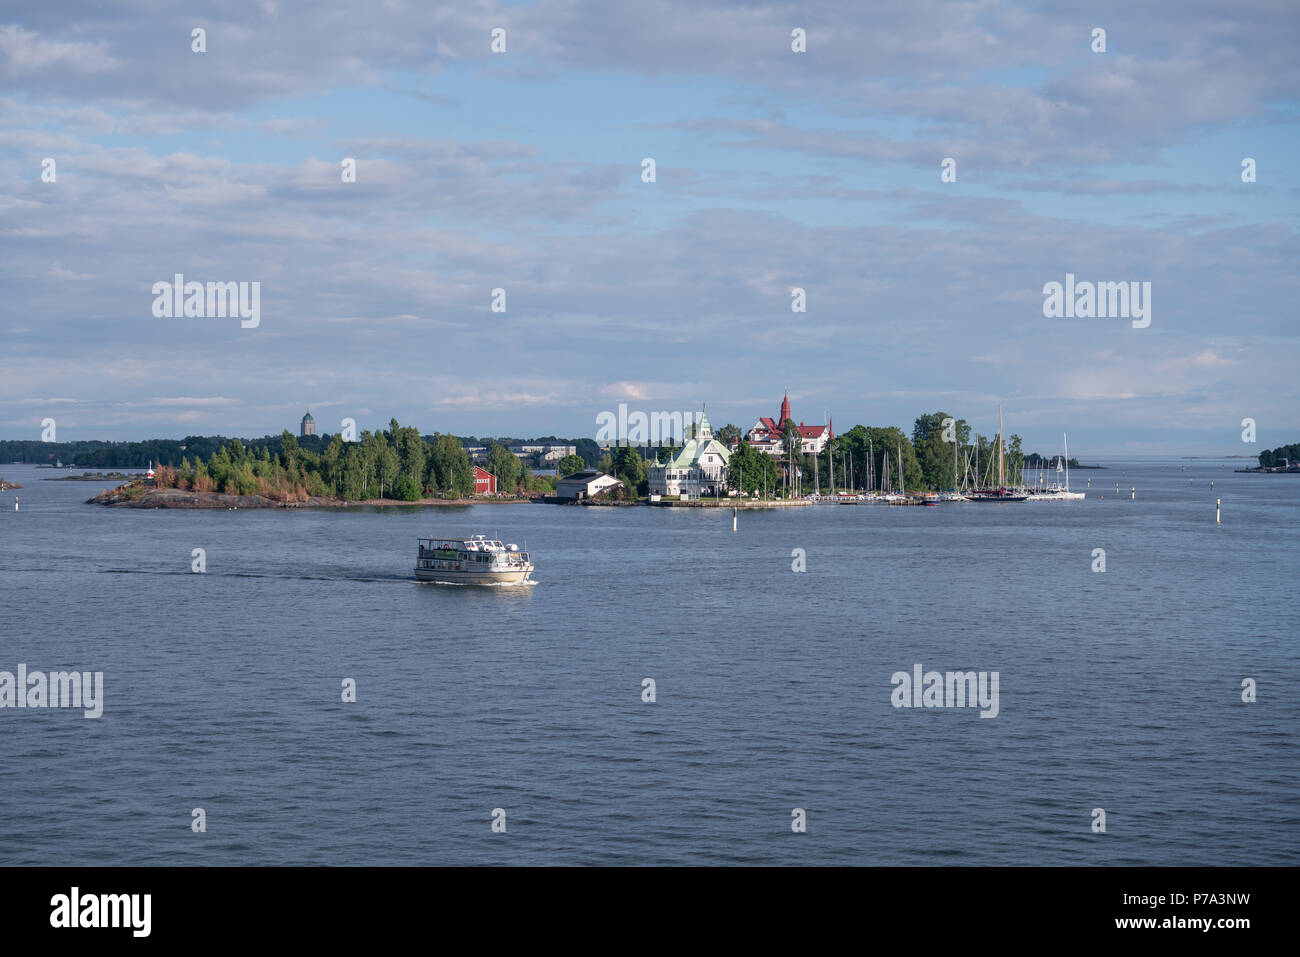 HELSINKI, FINLAND - 25/6/2018: Tourist boat arriving at Helsinki harbour with Valkosaari island in the background Stock Photo